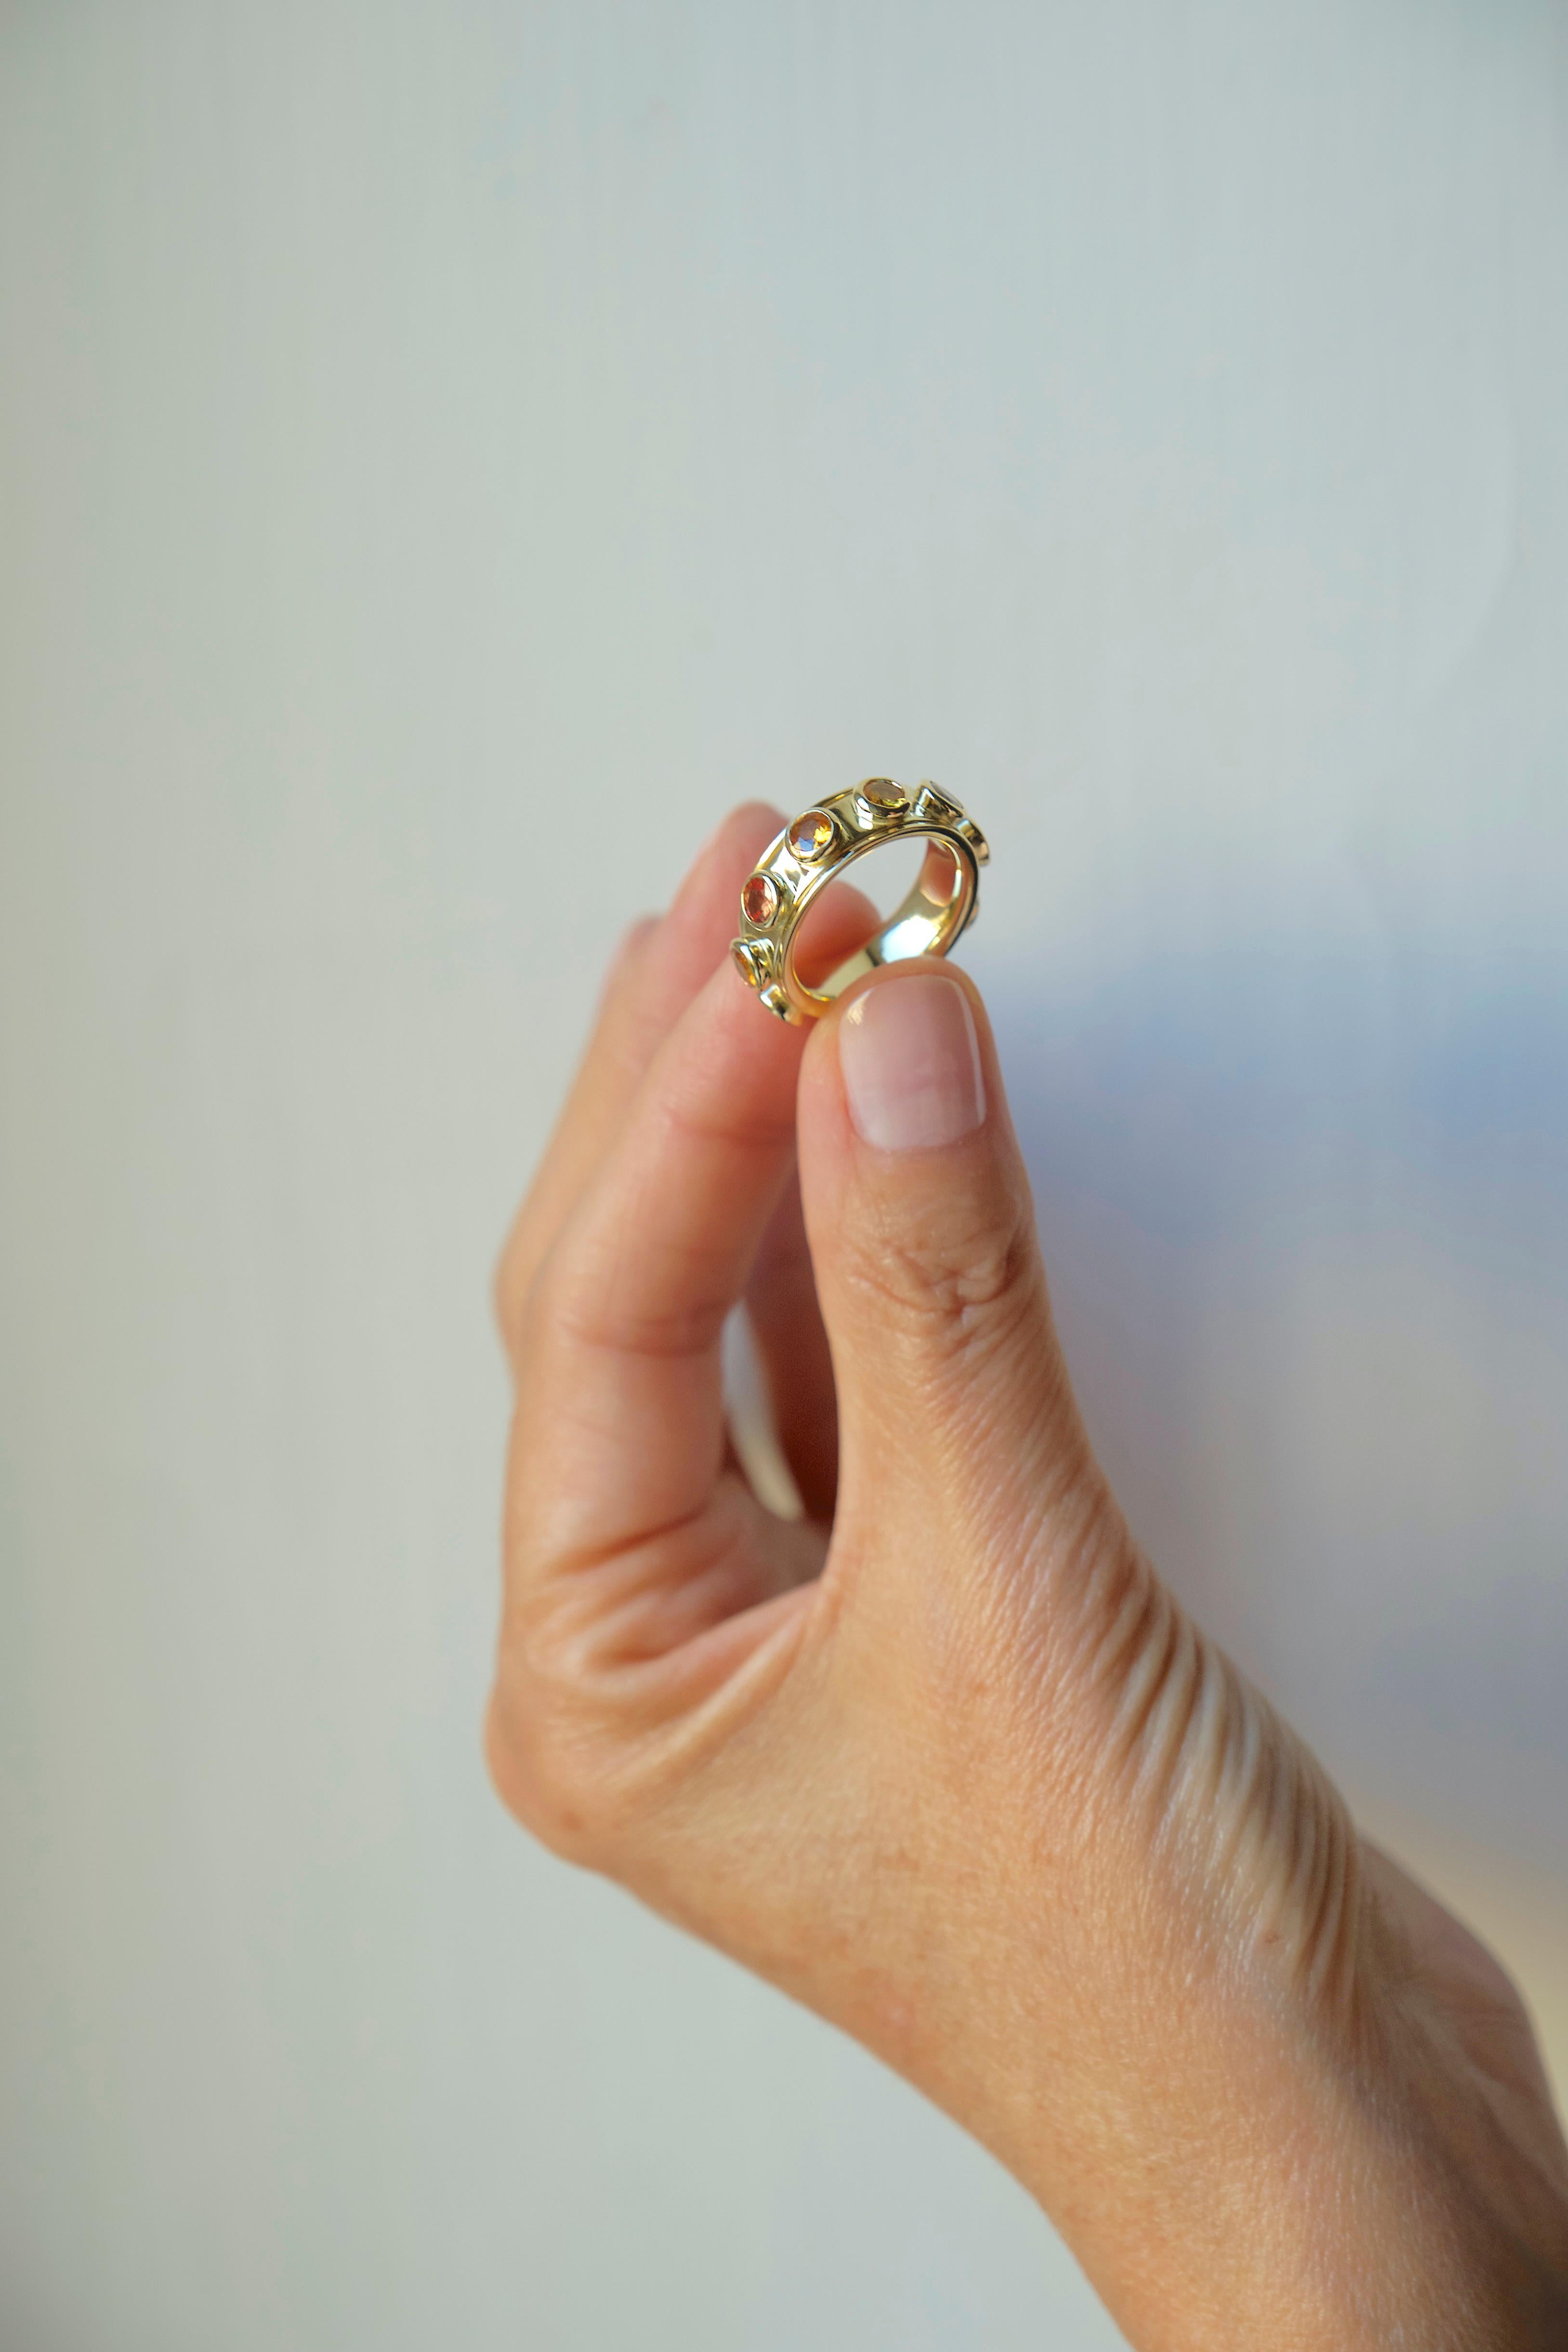 Crafted by Rossella Ugolini, this 18K yellow Gold ring offers more than simple elegance. It’s an extraordinary wellbeing tool designed with a rotating band adorned with stunning Yellow Sapphires in a gradient of captivating hues.
 Handmade with